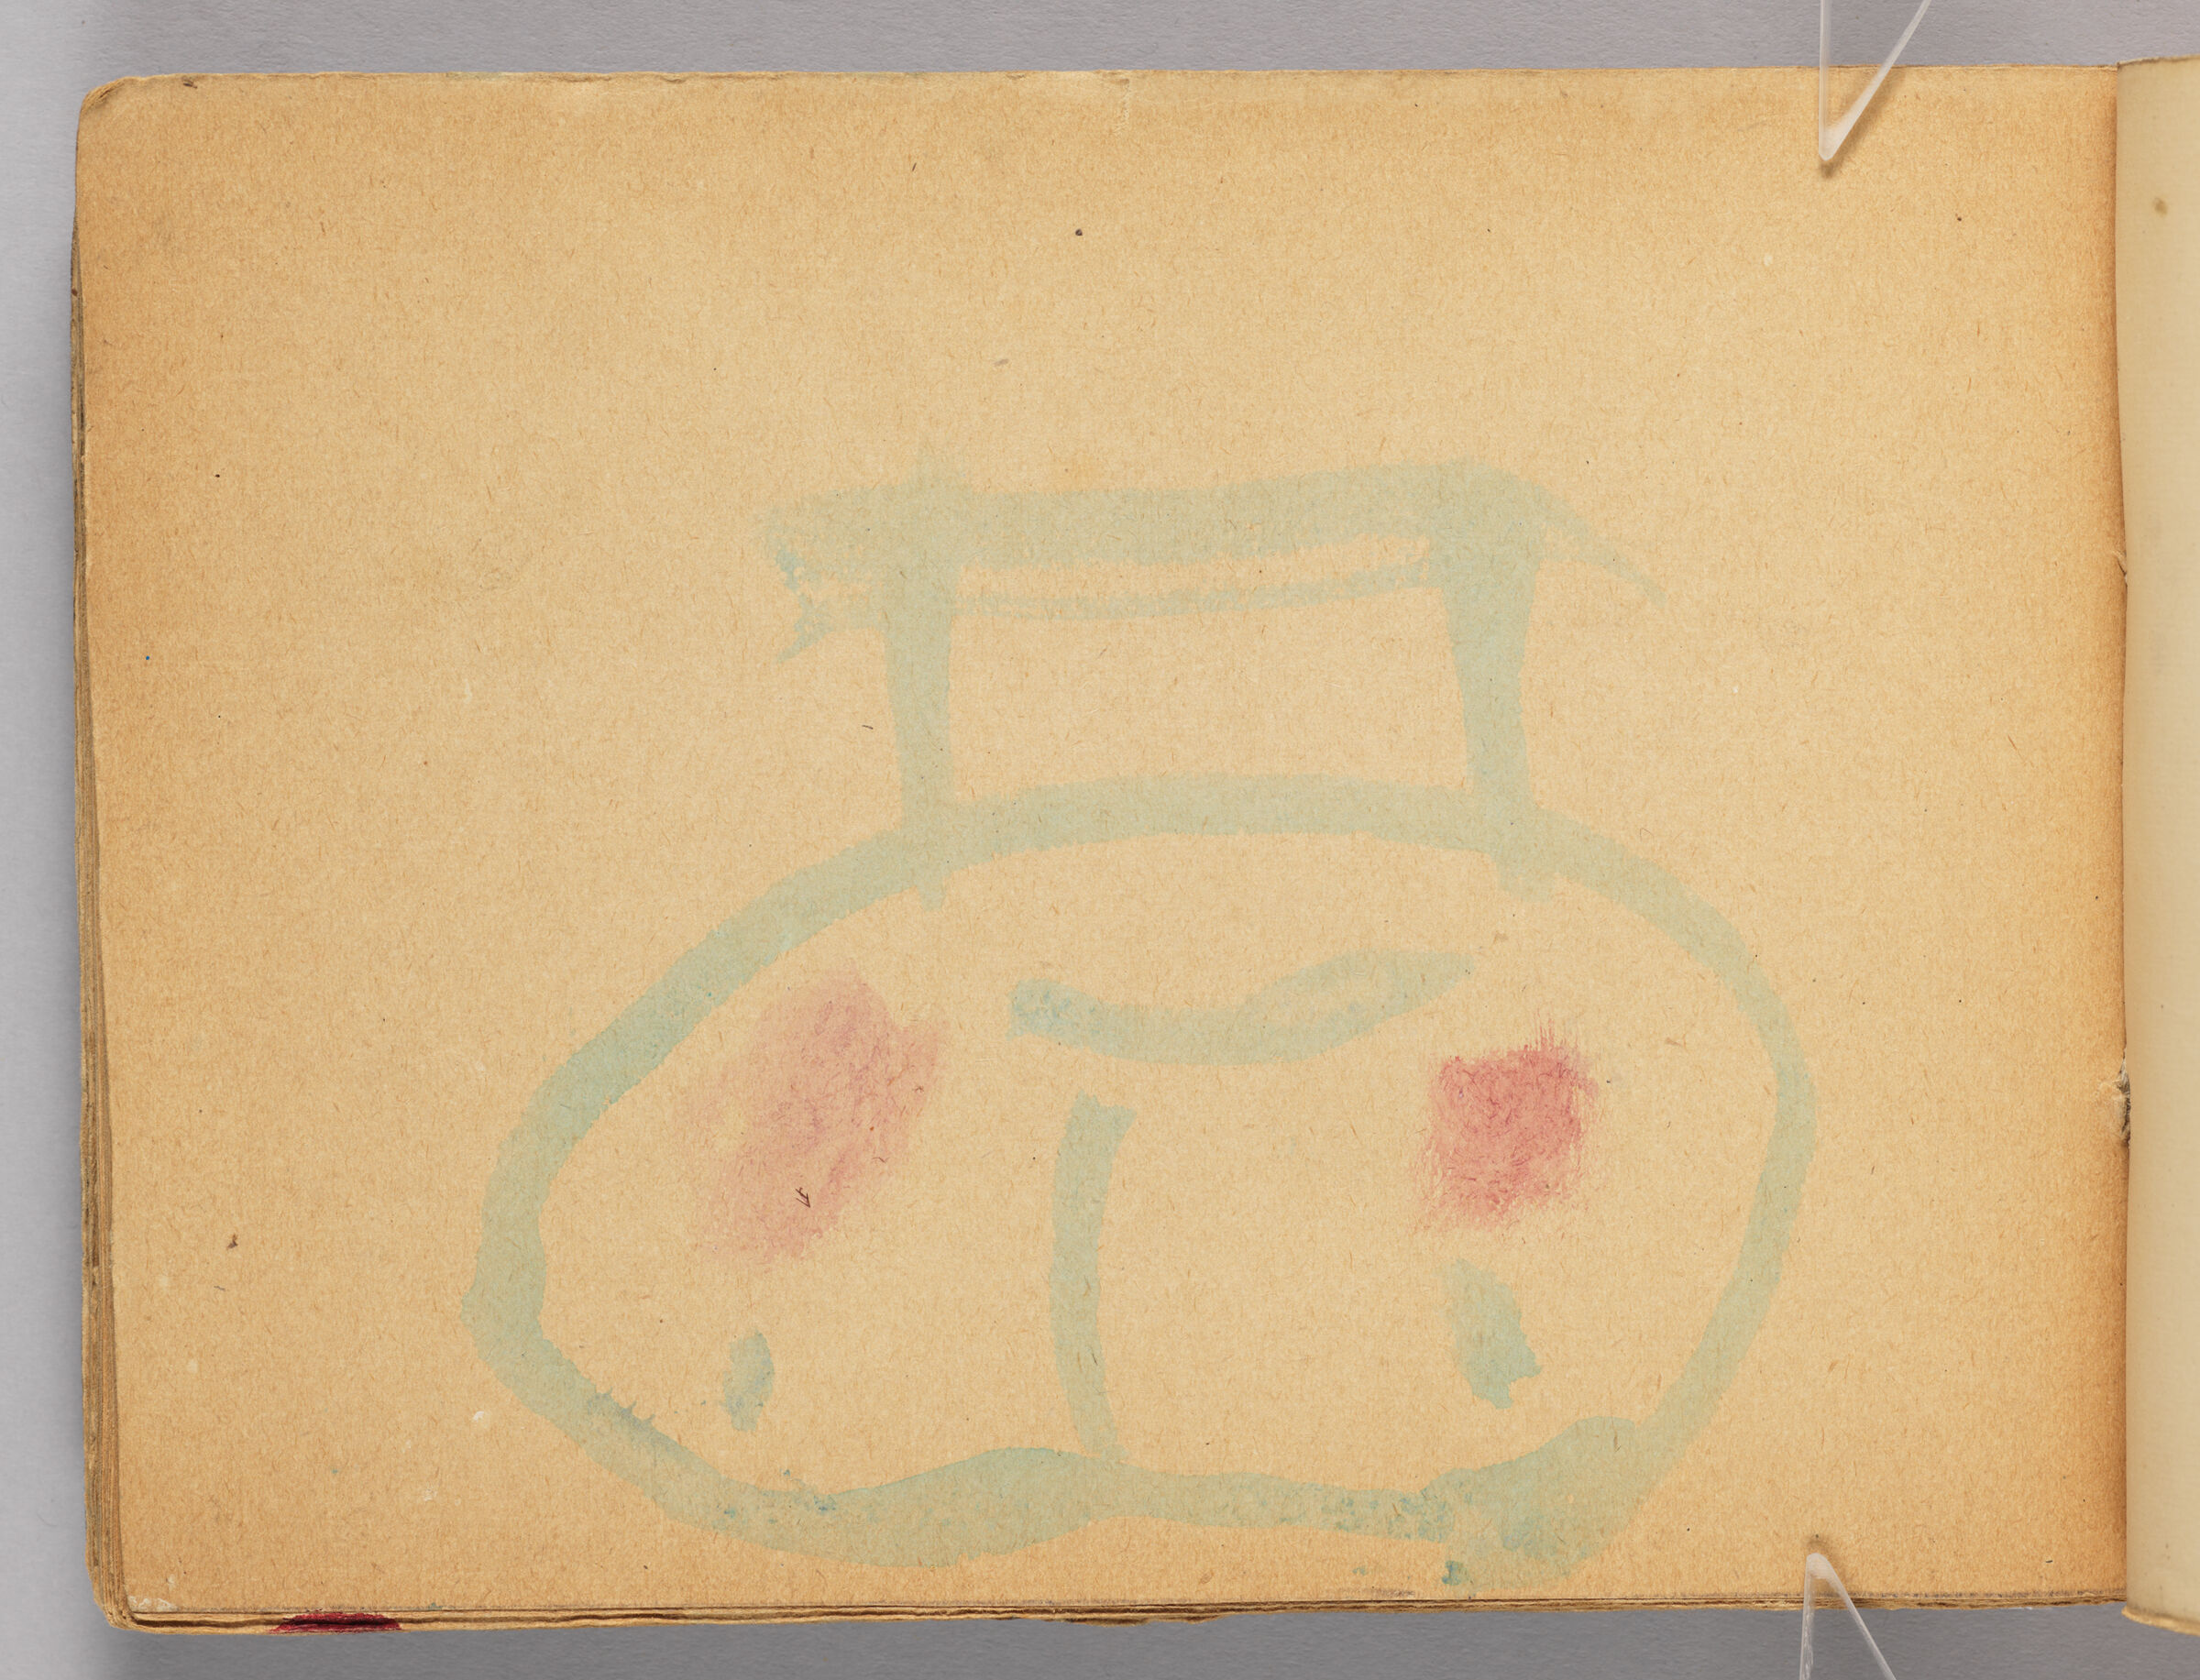 Untitled (Watercolor Sketch, Left Page); Untitled (Back Endpaper With Watercolor Transfer, Right Page)